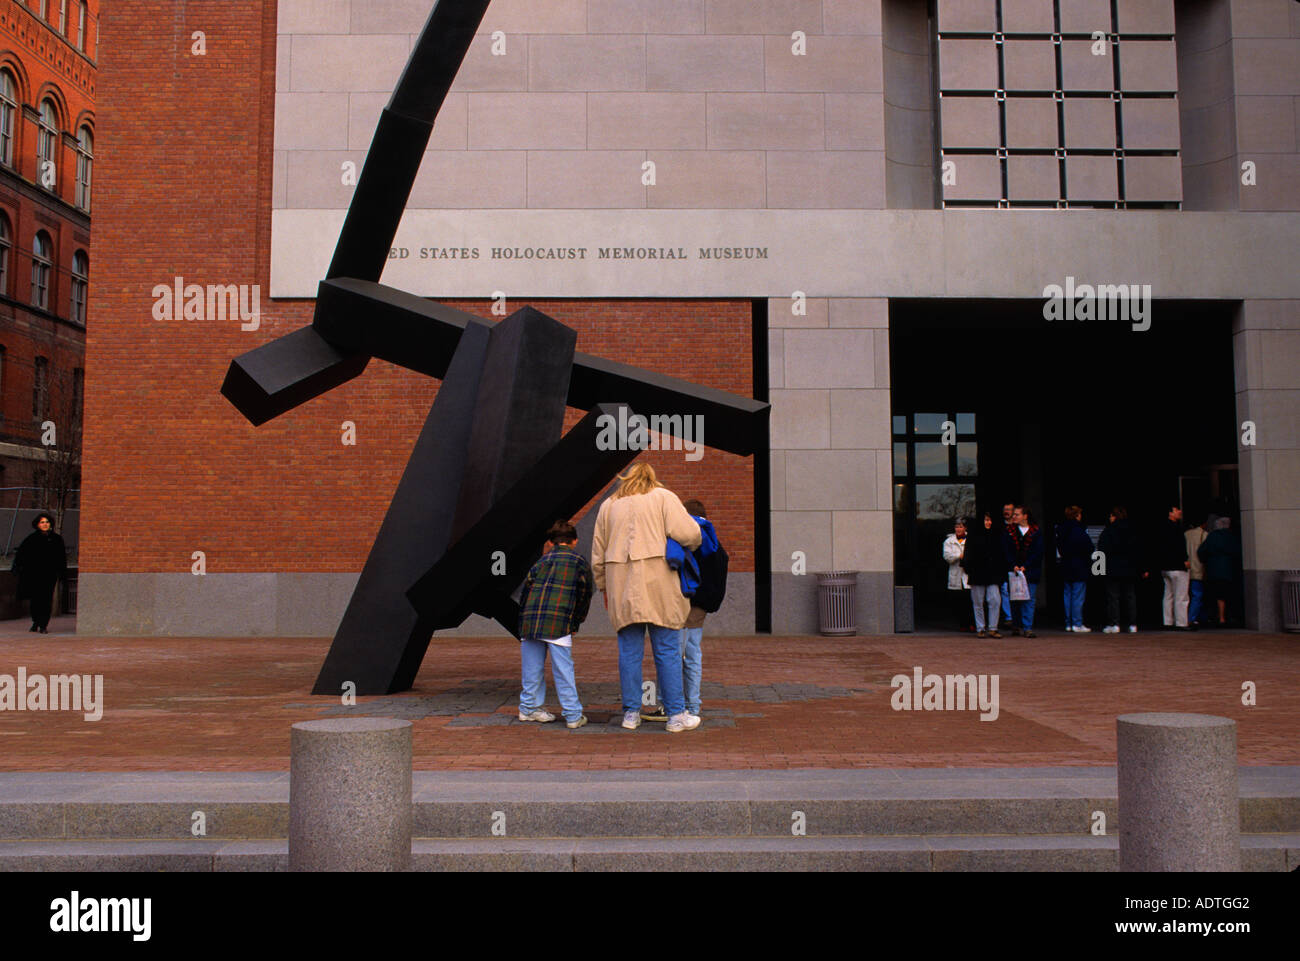 Washington DC The United States Holocaust Memorial Museum on the National Mall. Raoul Wallenberg Plaza entrance. Tourist attraction USA Stock Photo